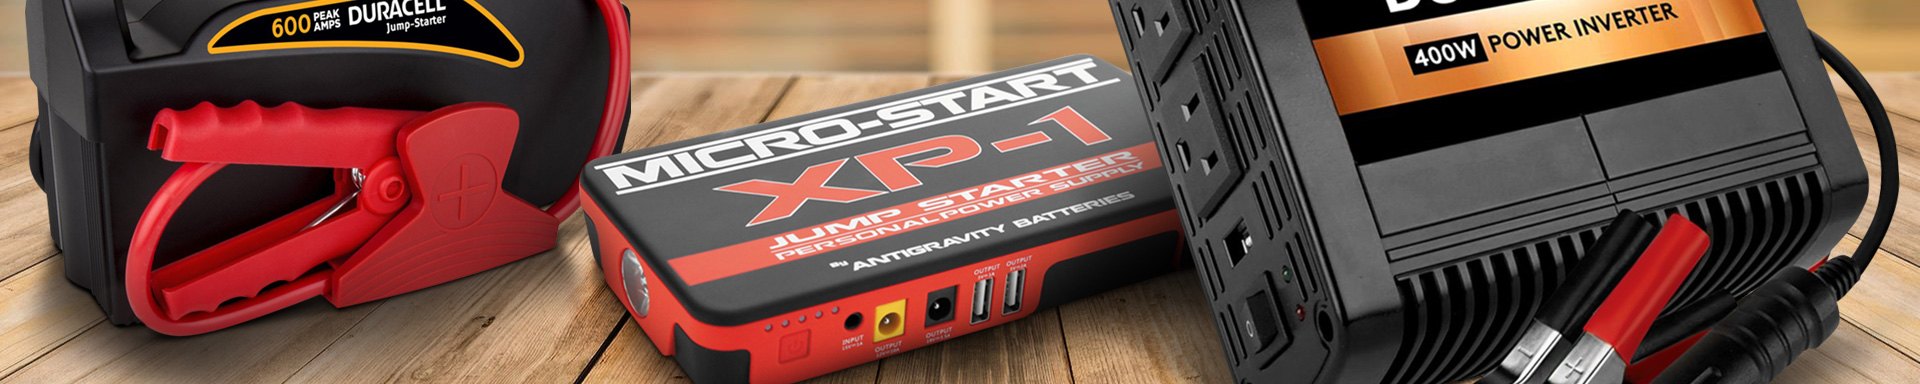 RV Battery Chargers & Jump Starters